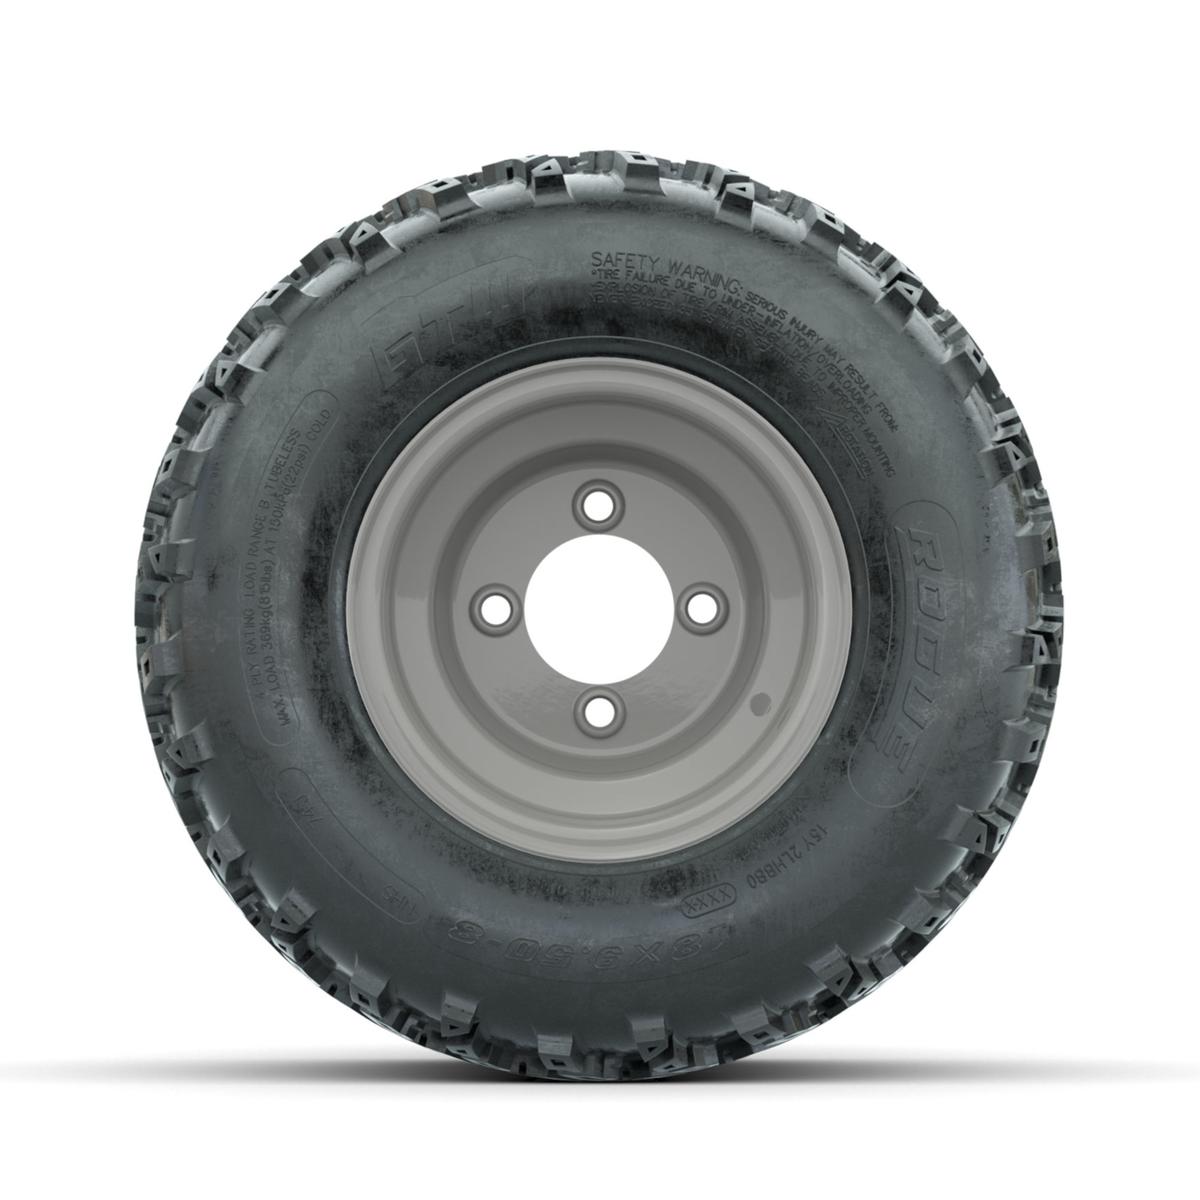 GTW Steel Club Car Grey Centered 8 in Wheels with 18x9.50-8 Rogue All Terrain Tires – Full Set